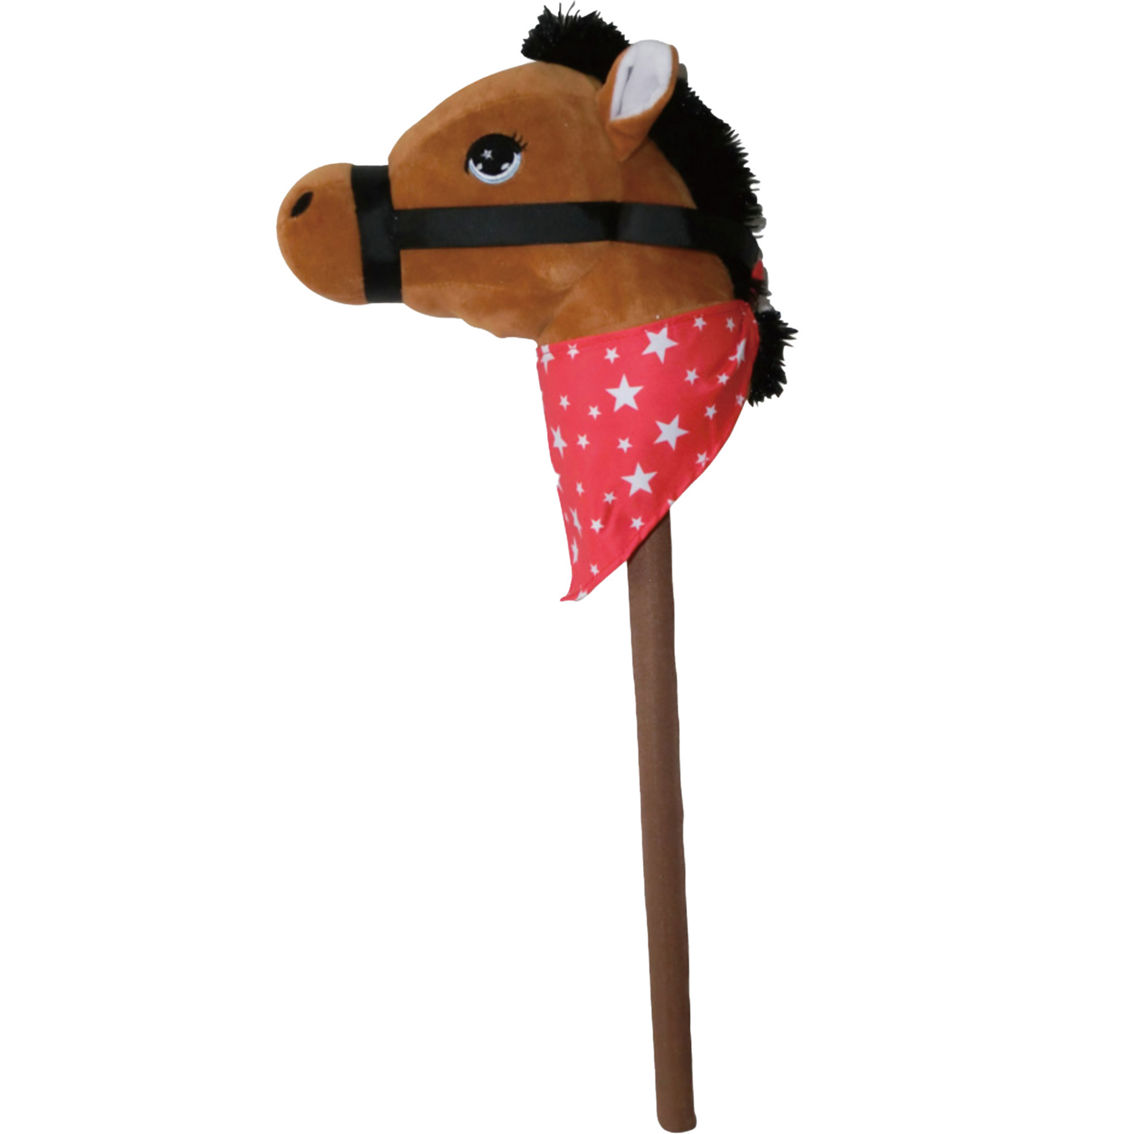 Ponyland Toys Stick Horse with Sound, Brown Horse - Image 2 of 6